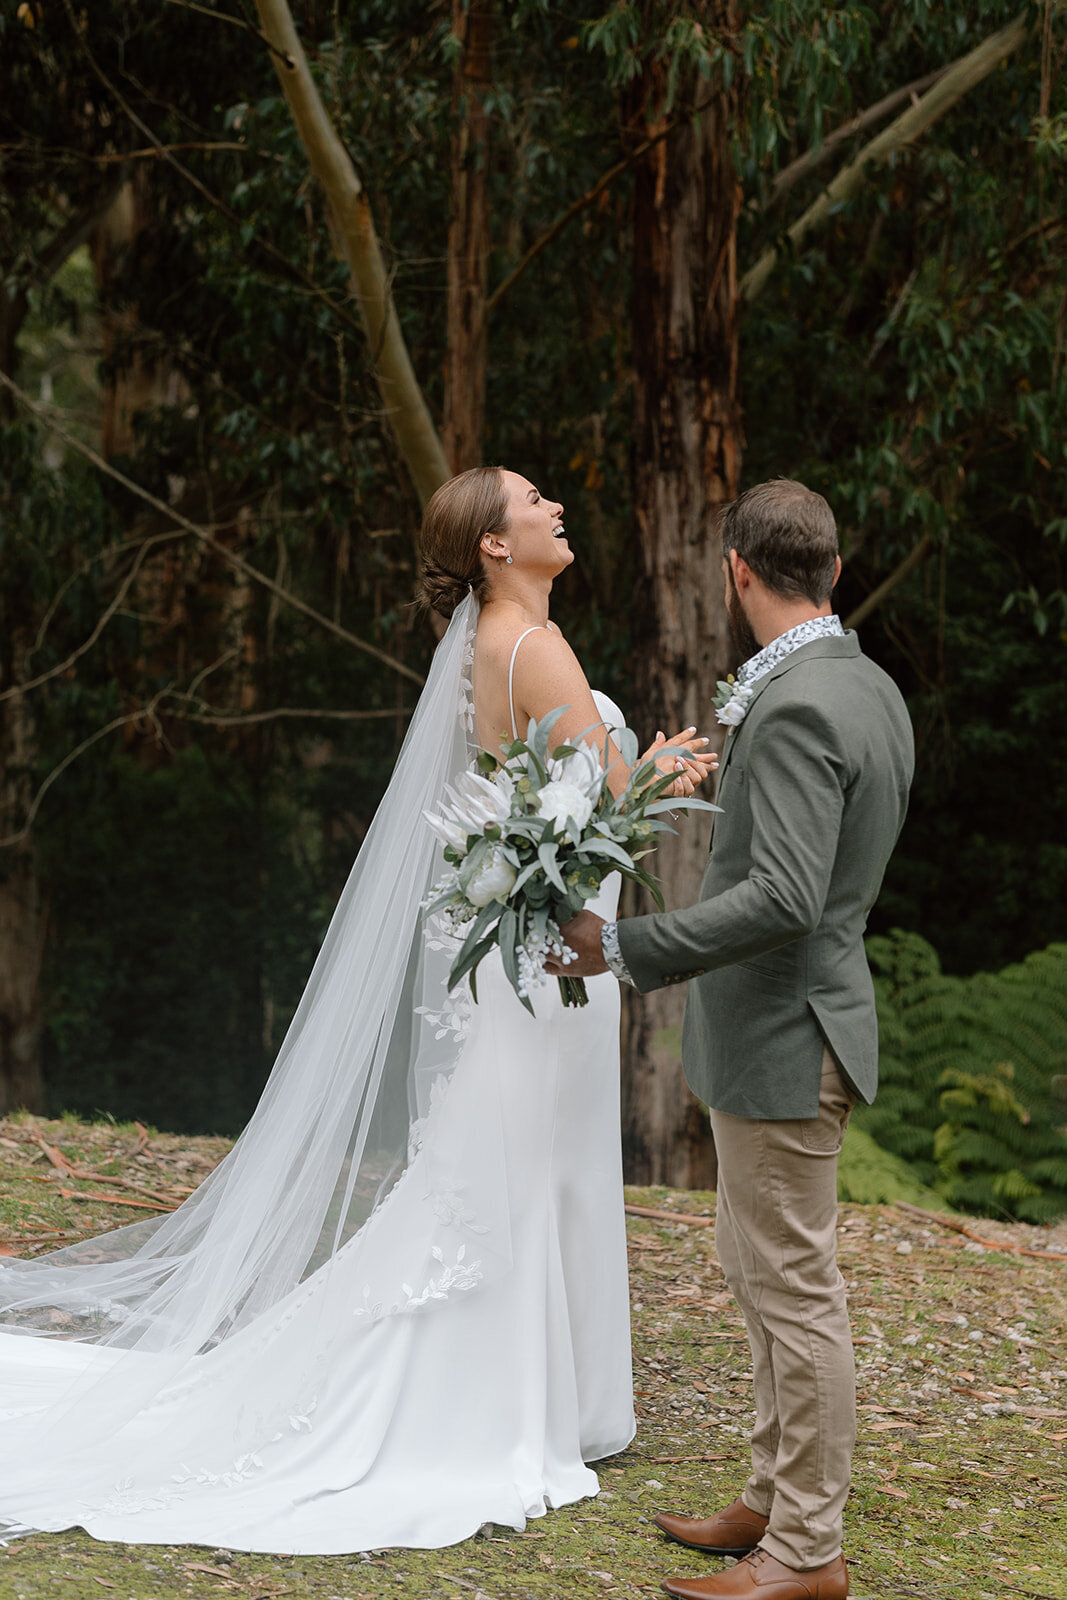 Stacey&Cory-Coast&Pines-65